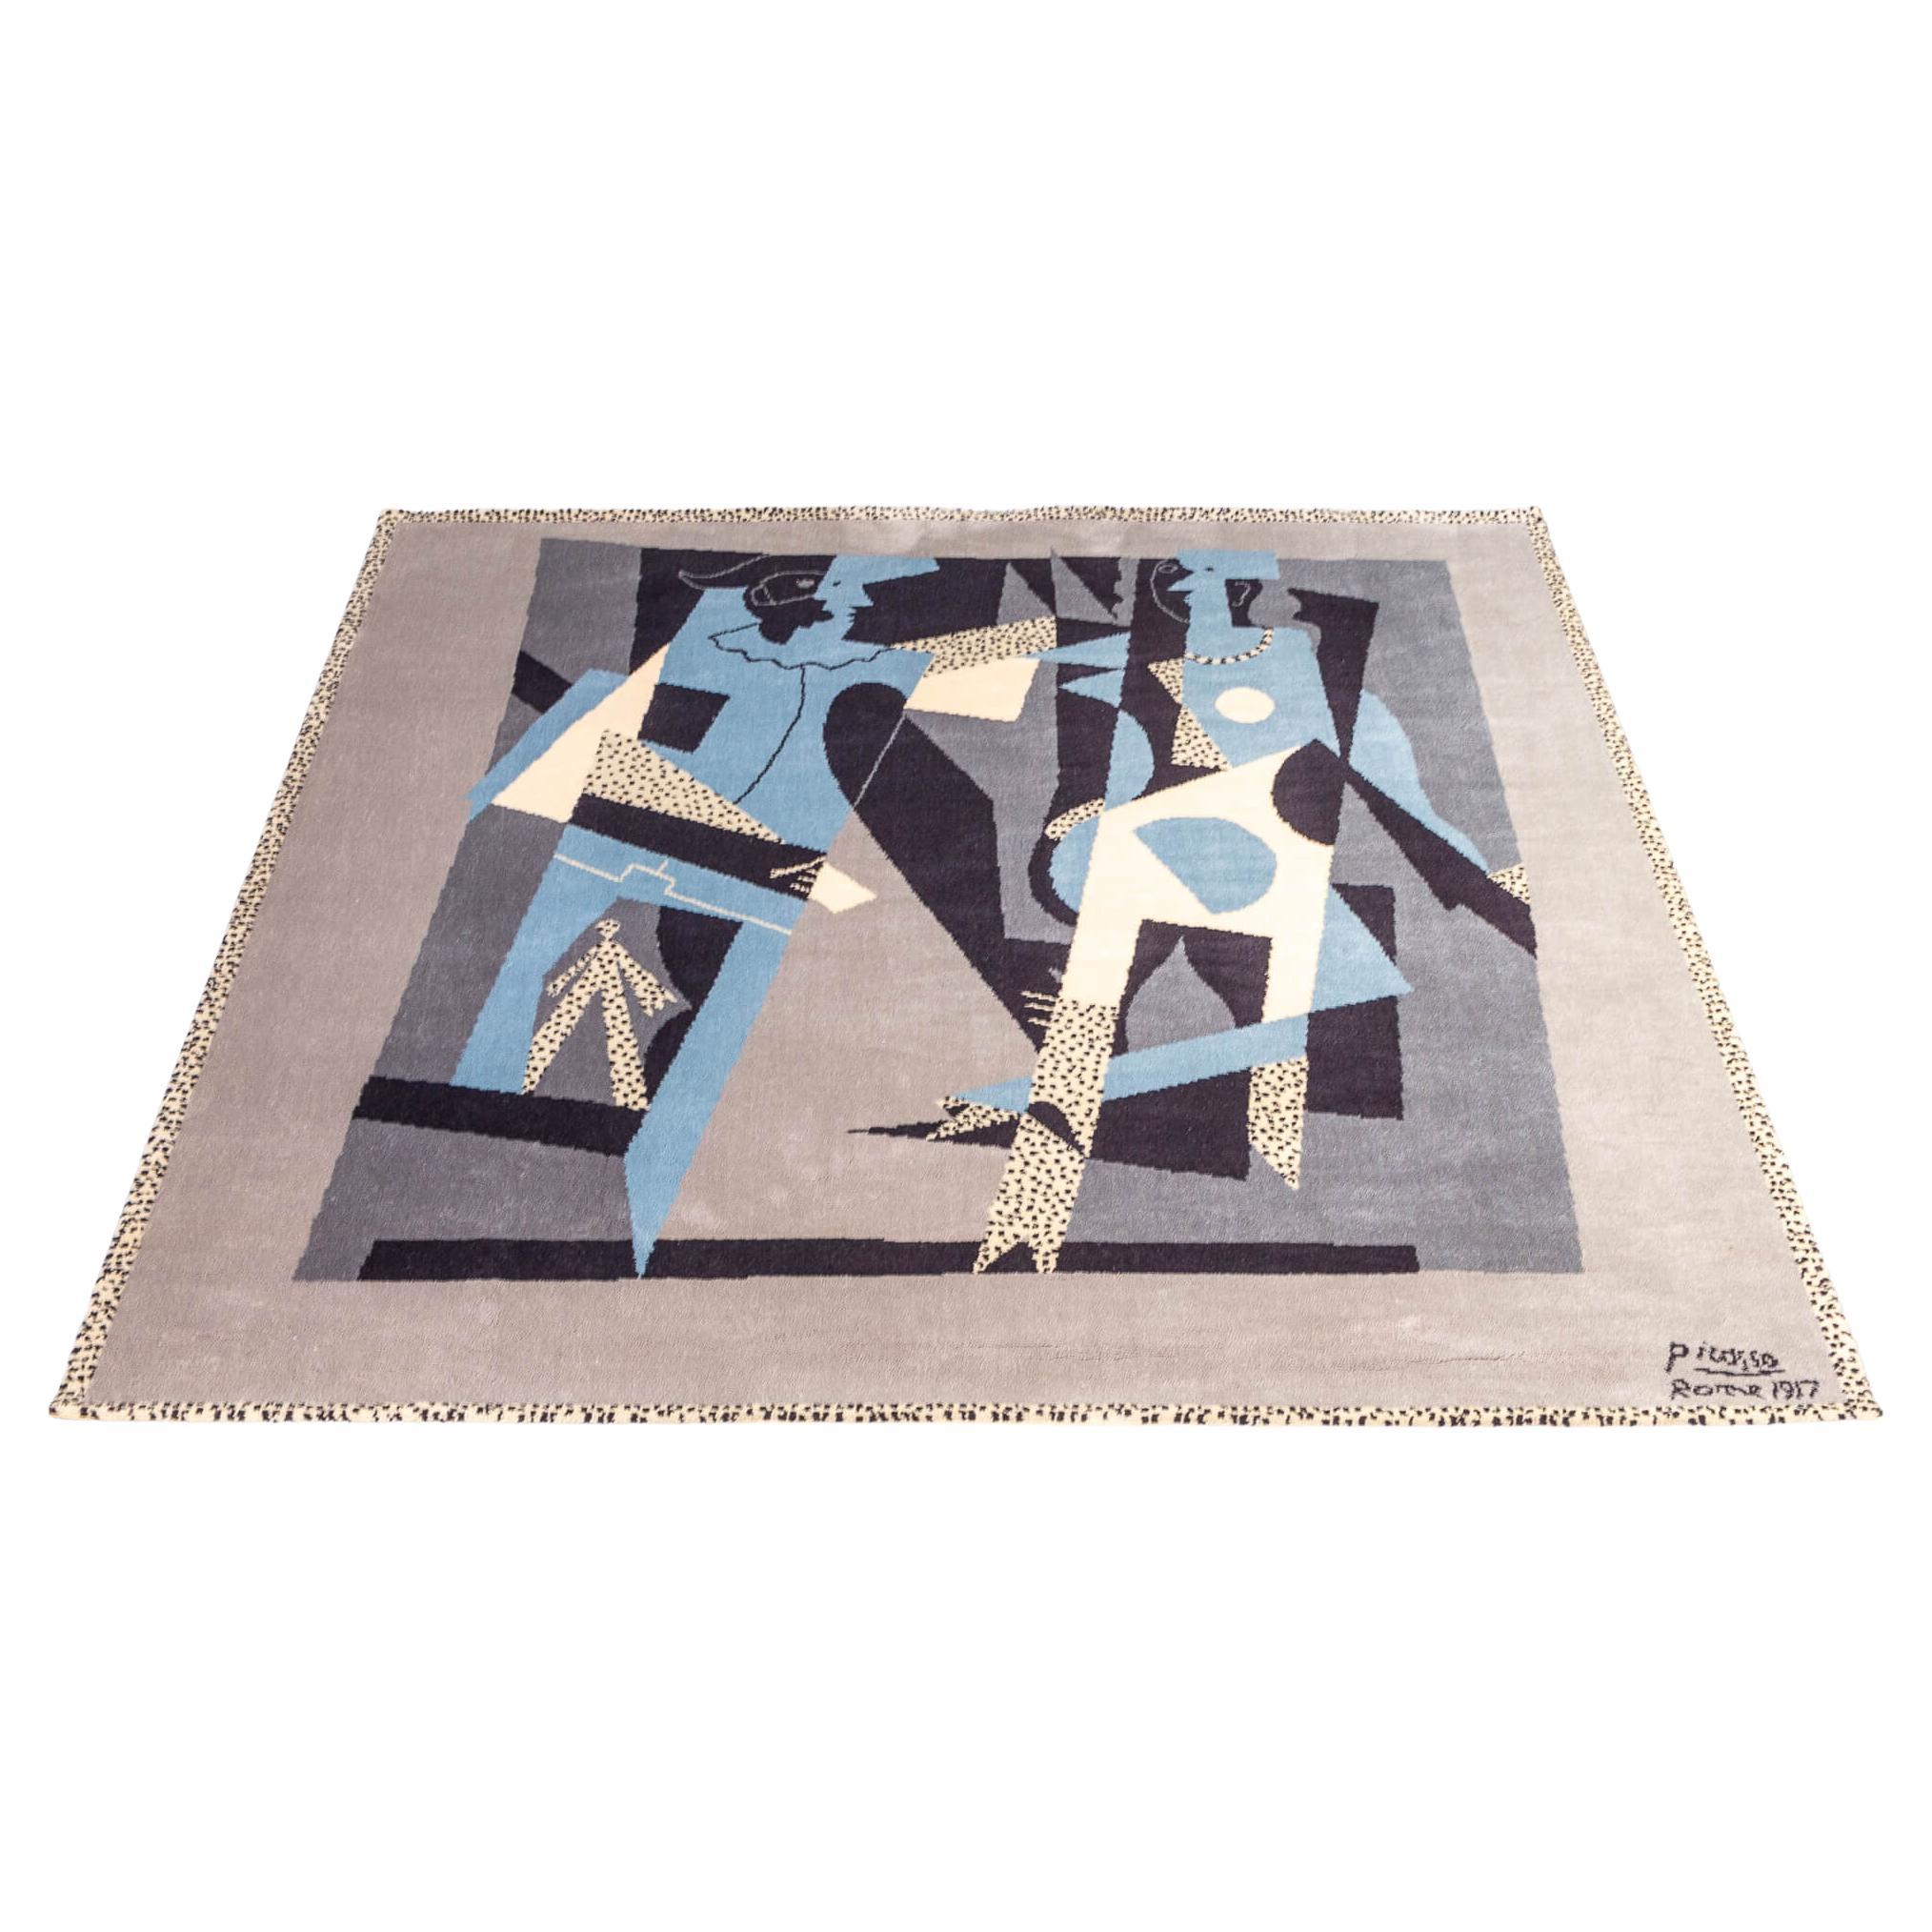 Wall /Floor Carpet ”Arlequin Ymujer Con Colar” for Desso Netherlands For Sale